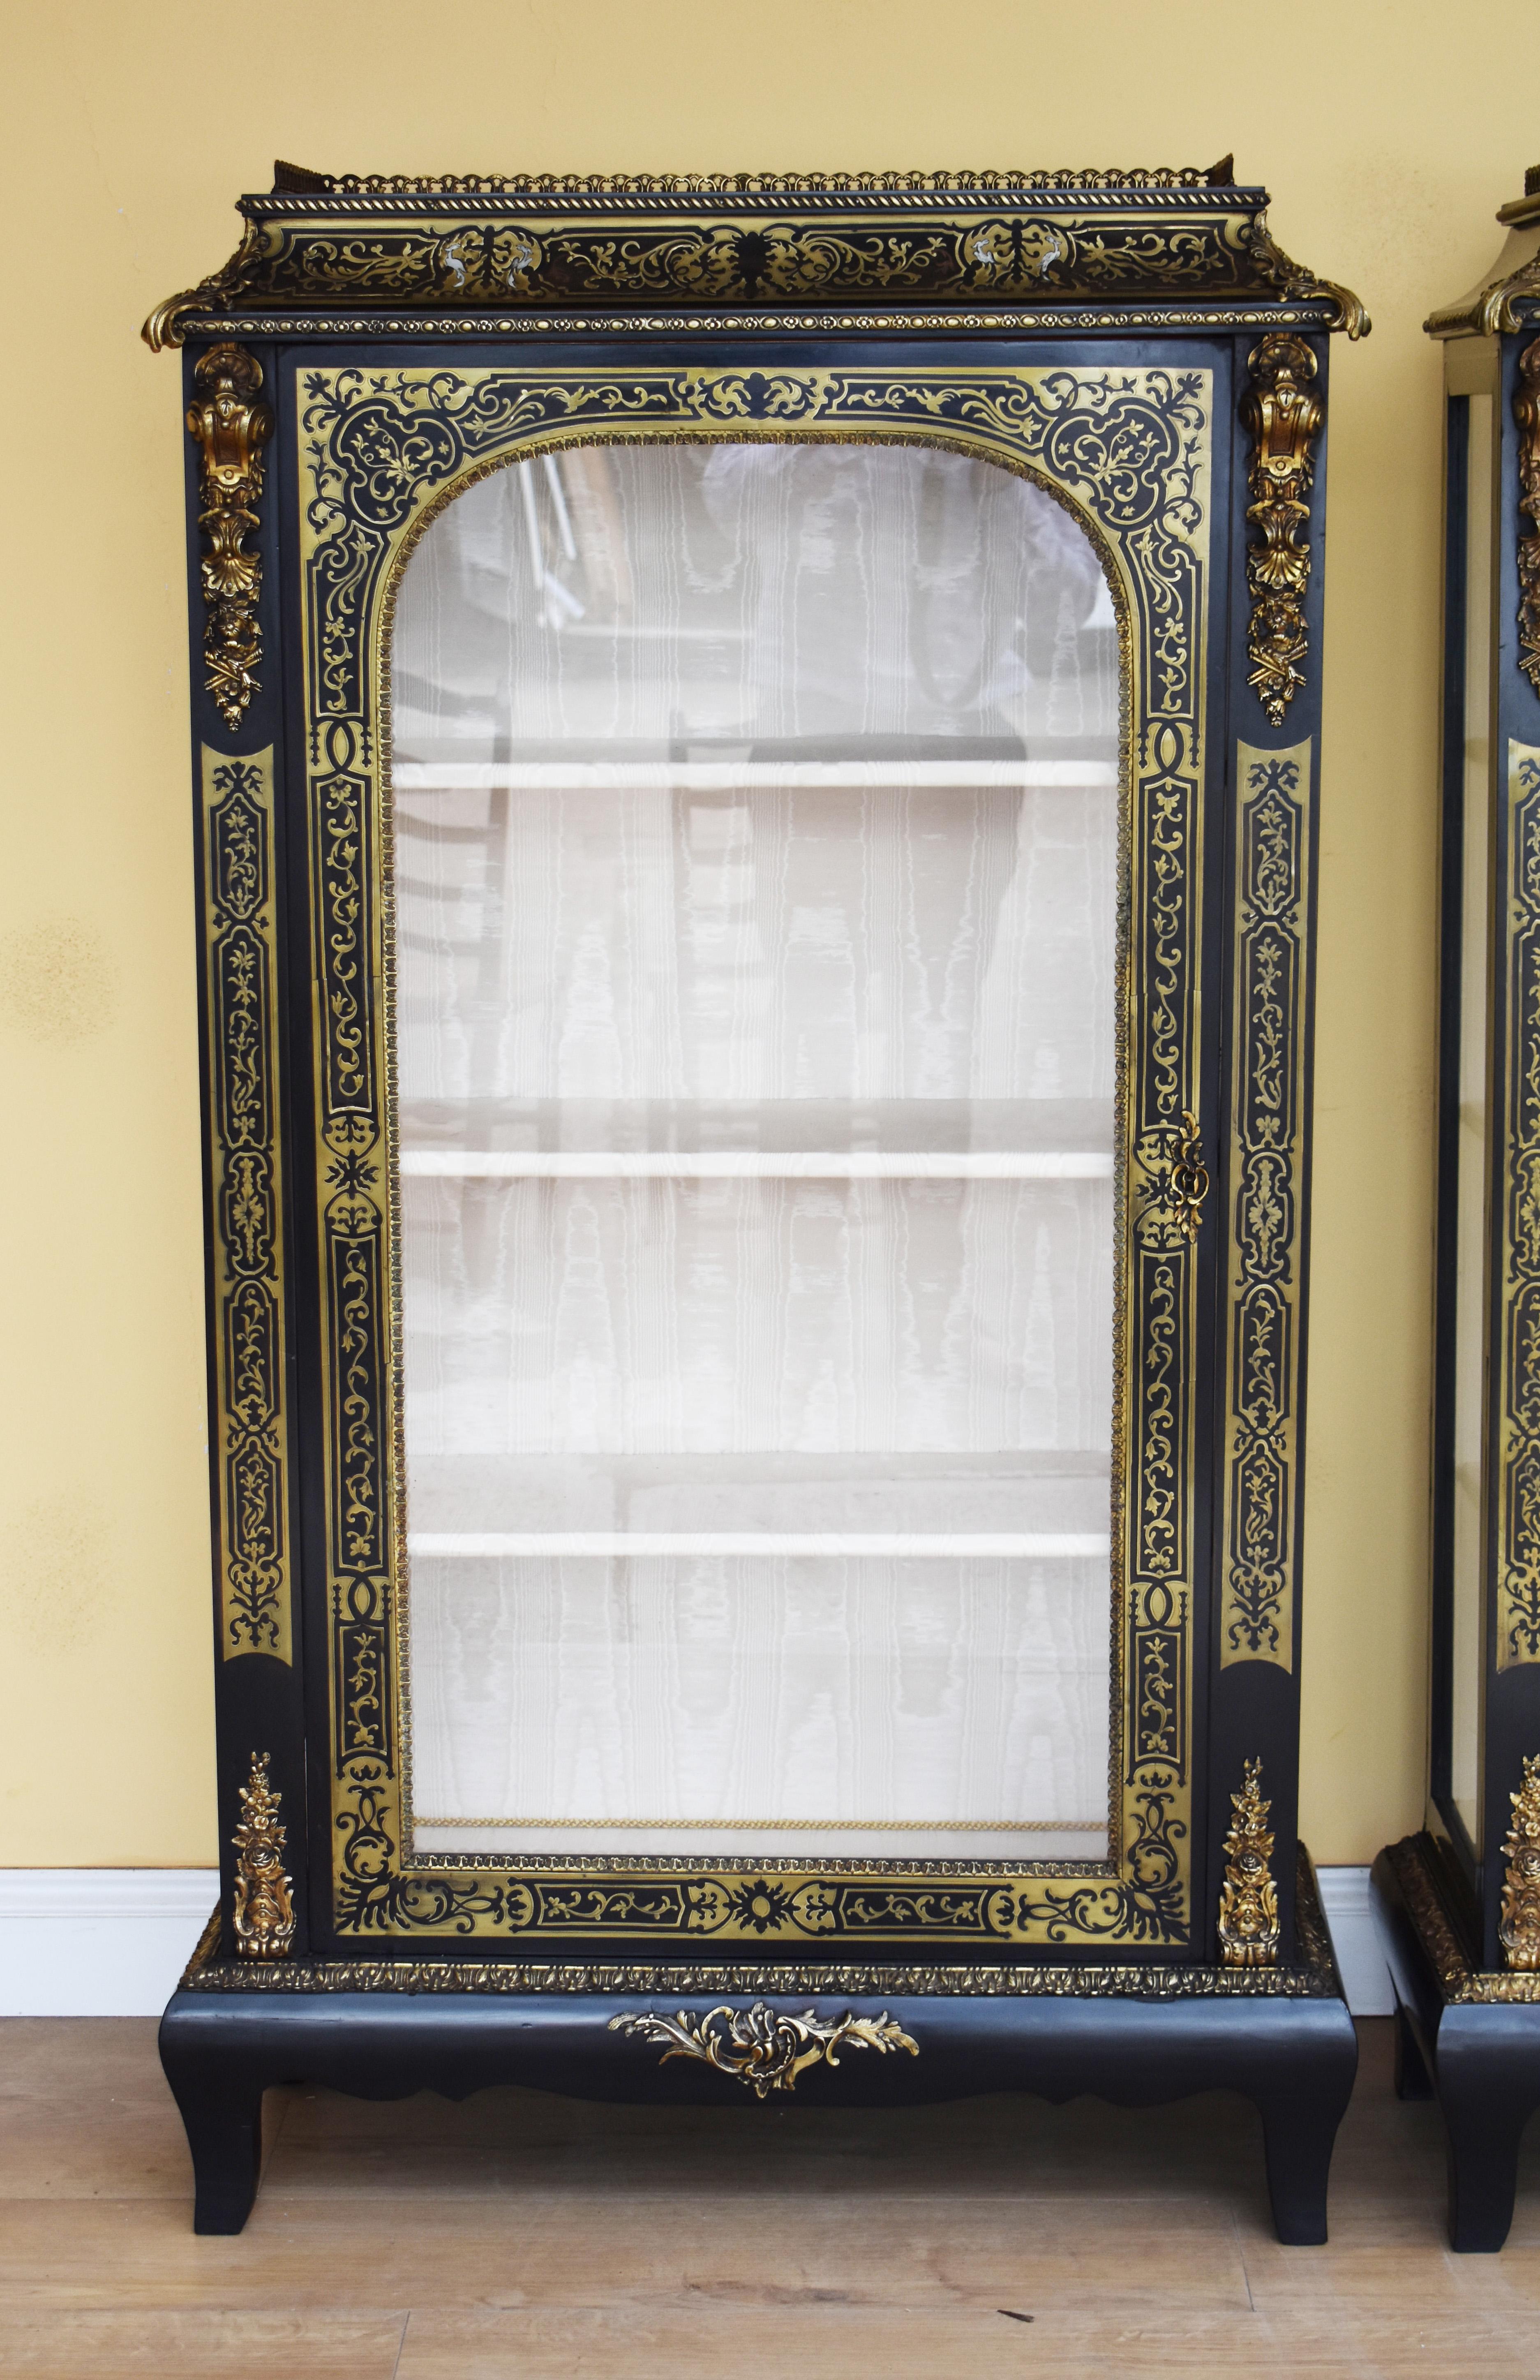 For sale is a good pair of 19th century Victorian ebonized Boulle cabinets. Each cabinet has a brass gallery to the top, with a single glazed door below. Each door is surrounded by intricate brass inlay and also has decorative mounts to the top and